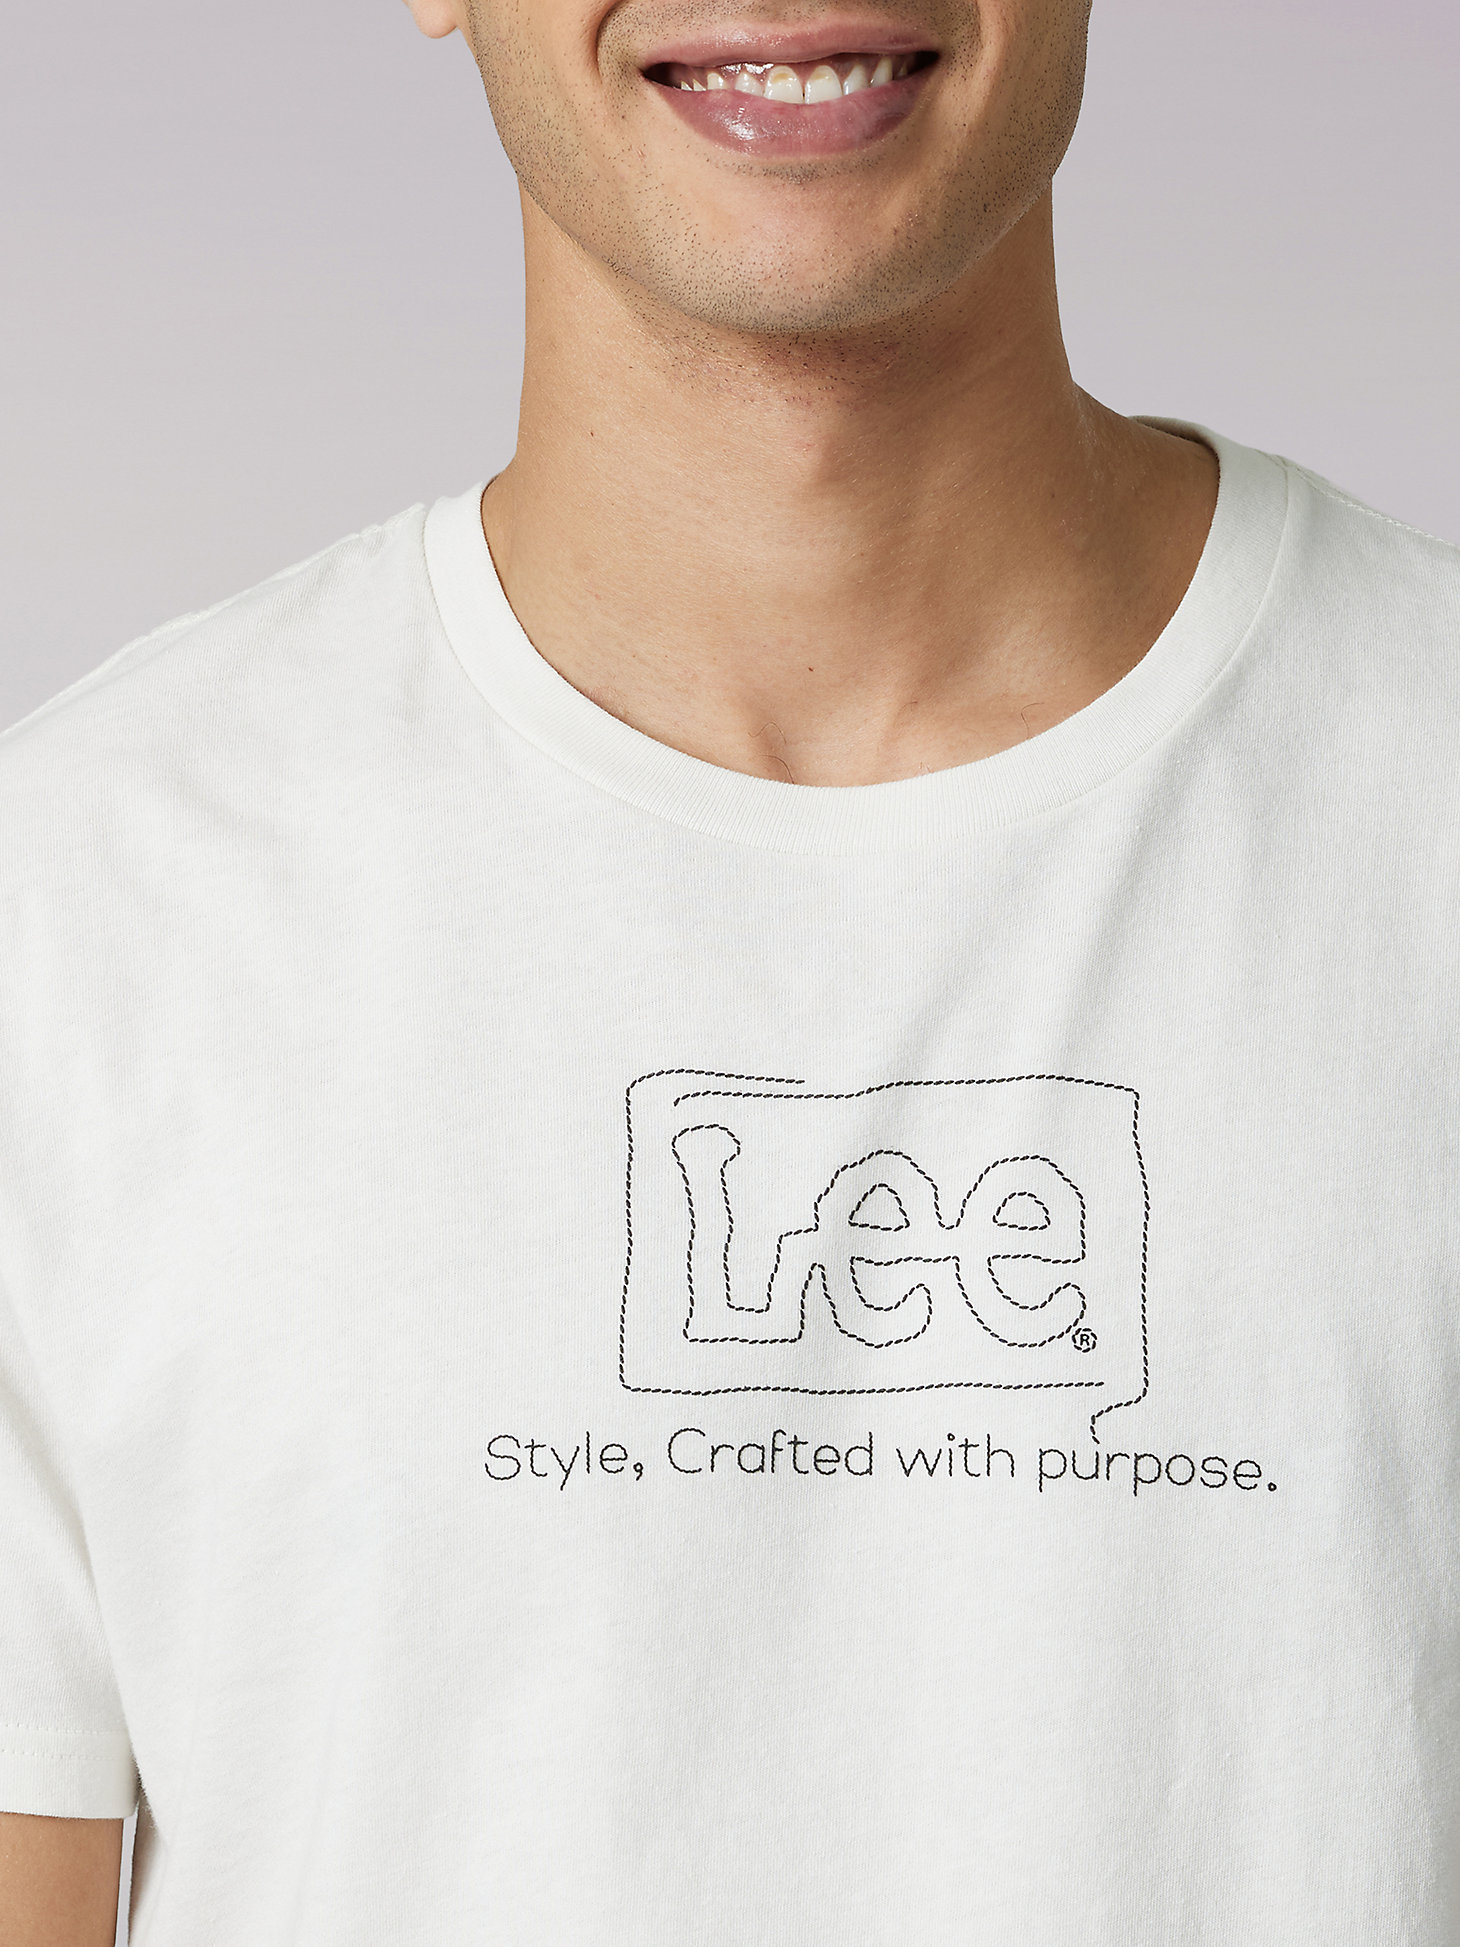 Men's Heritage Lee Crafted With Purpose Tee in Tofu alternative view 3